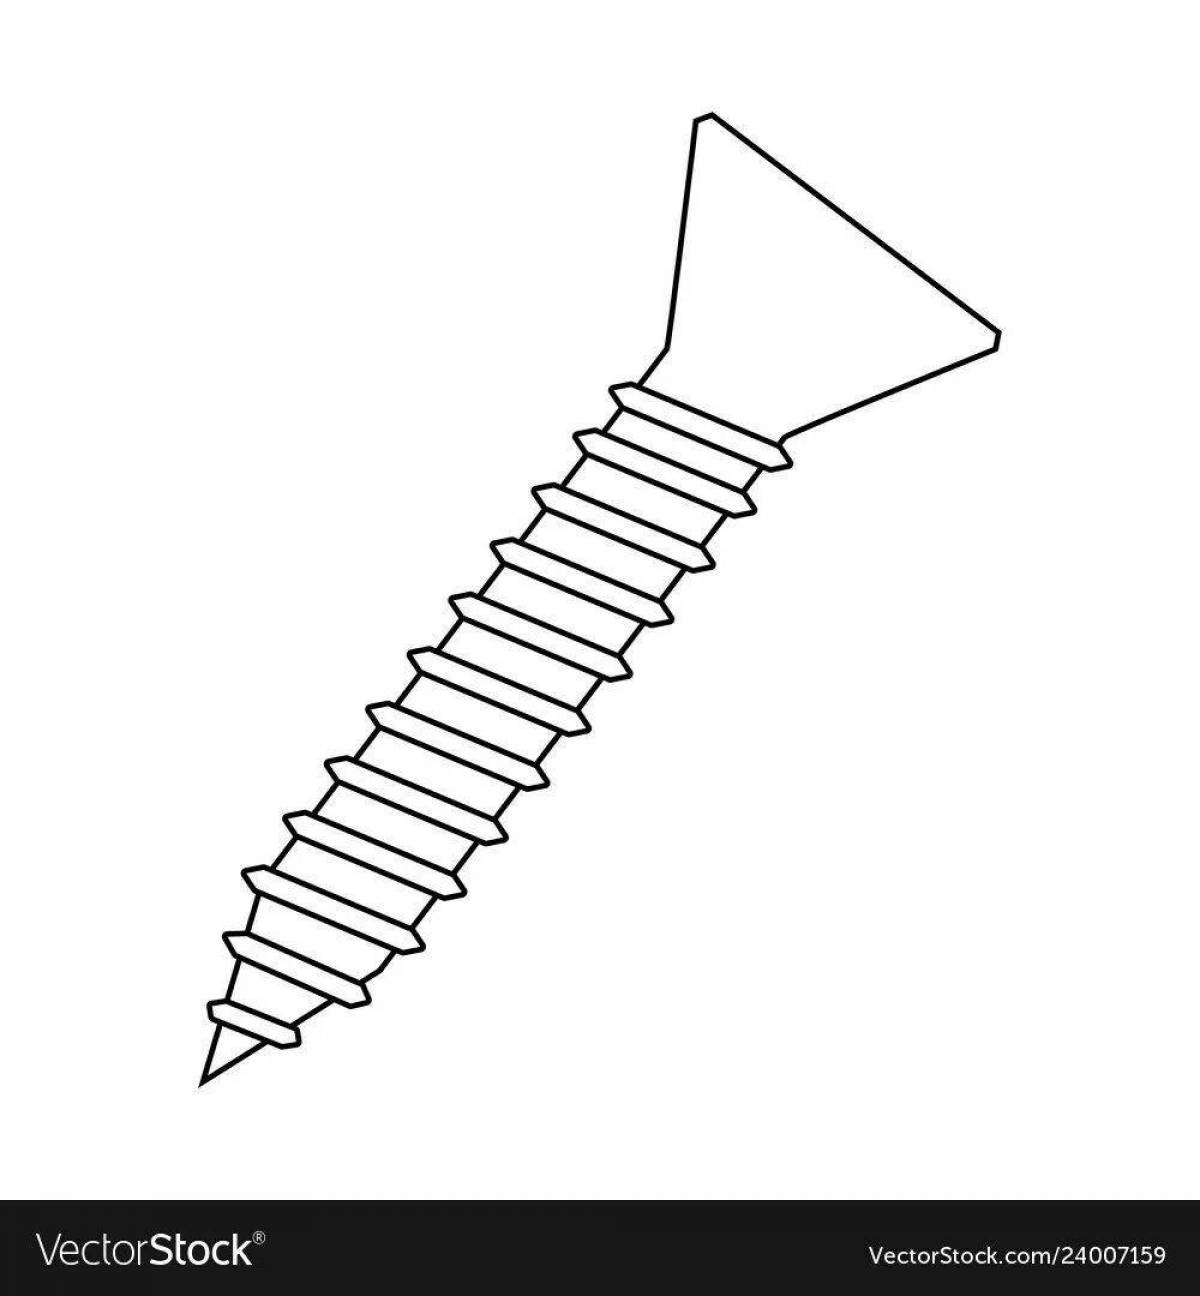 Exciting screw coloring page